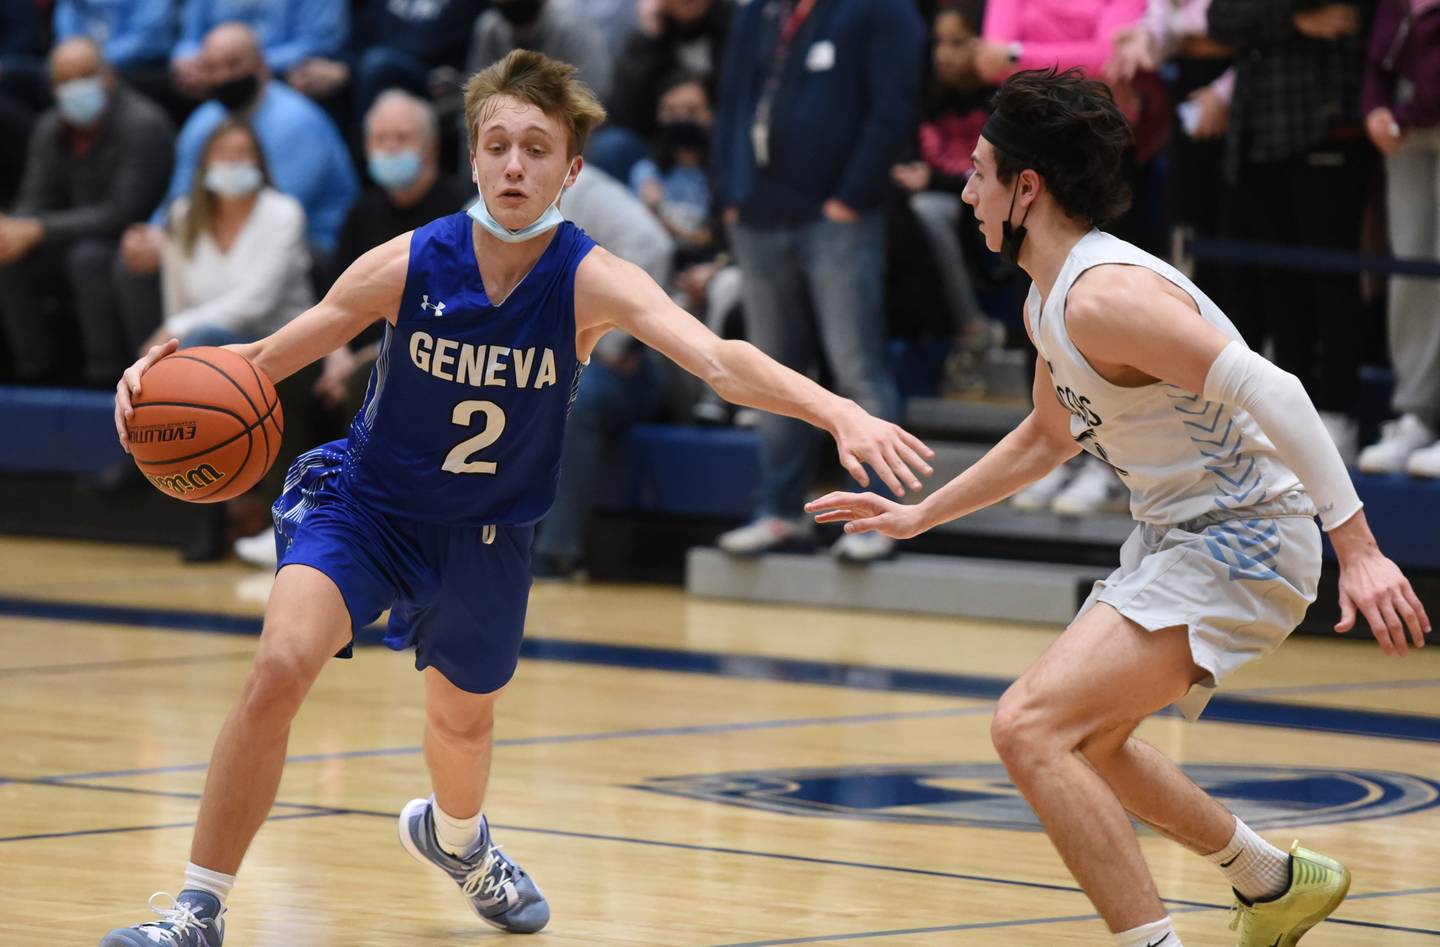 Geneva's Michael Lawrence (2) finds room to work around Lake Park's Vito LaGioia during Wednesday's boys basketball game in Roselle.